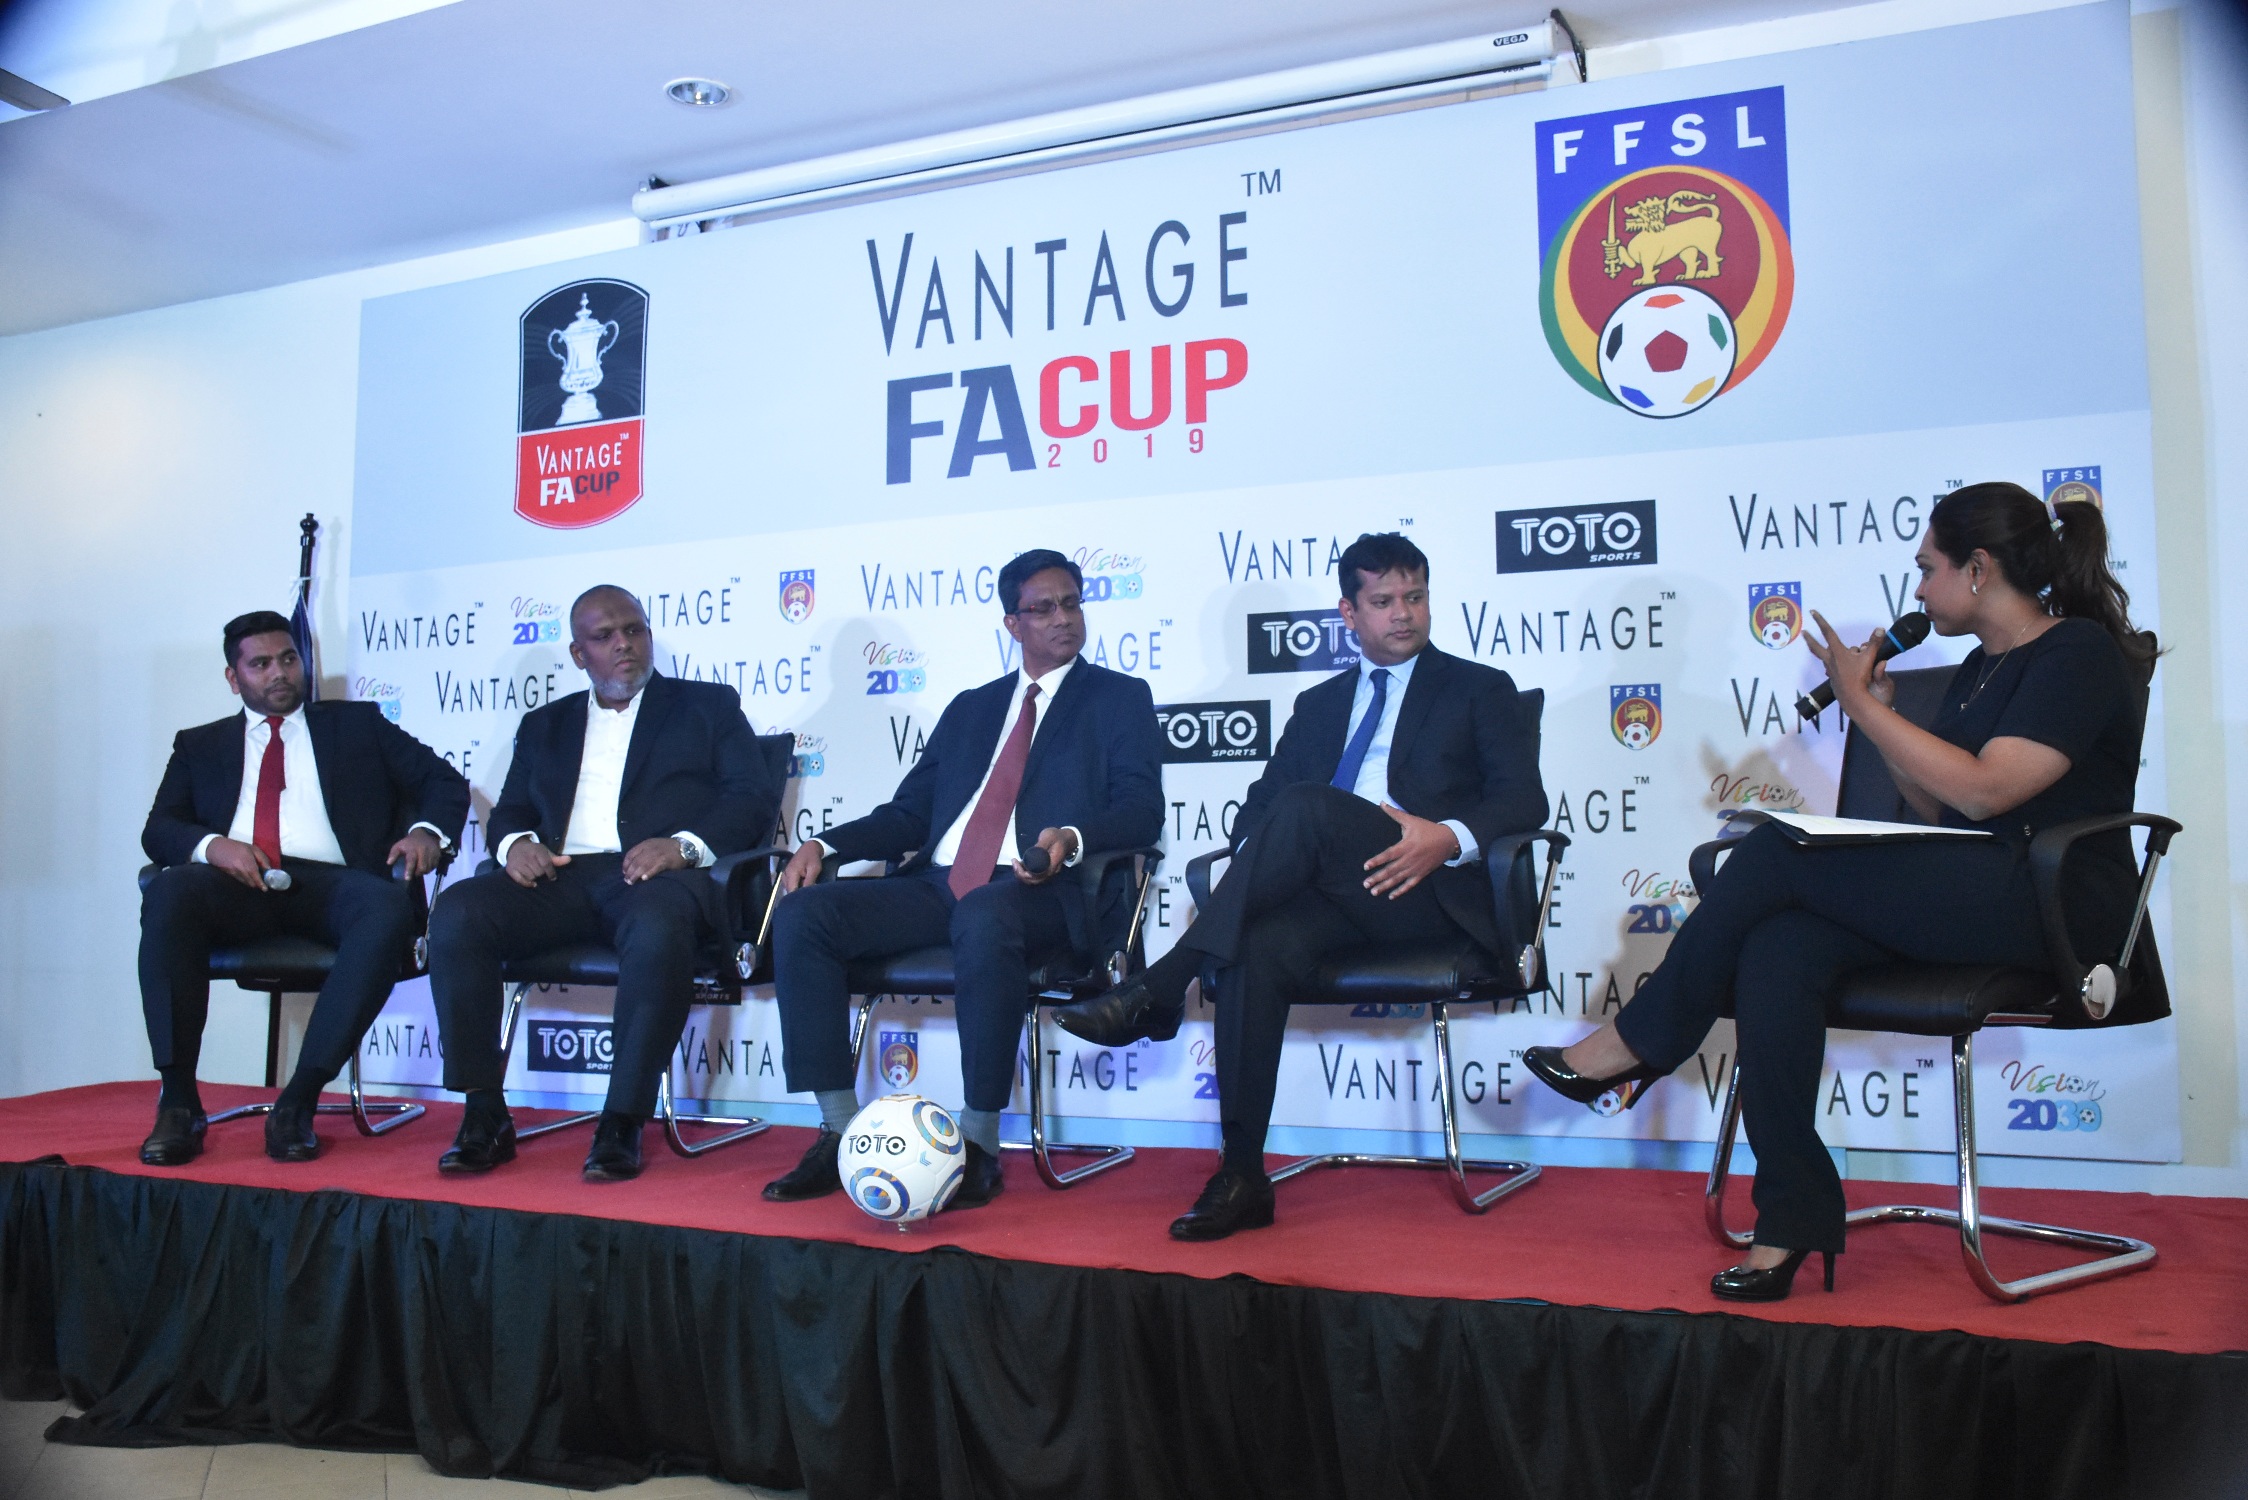 “Vantage” continues to tie up with FFSL for FA Cup 2019